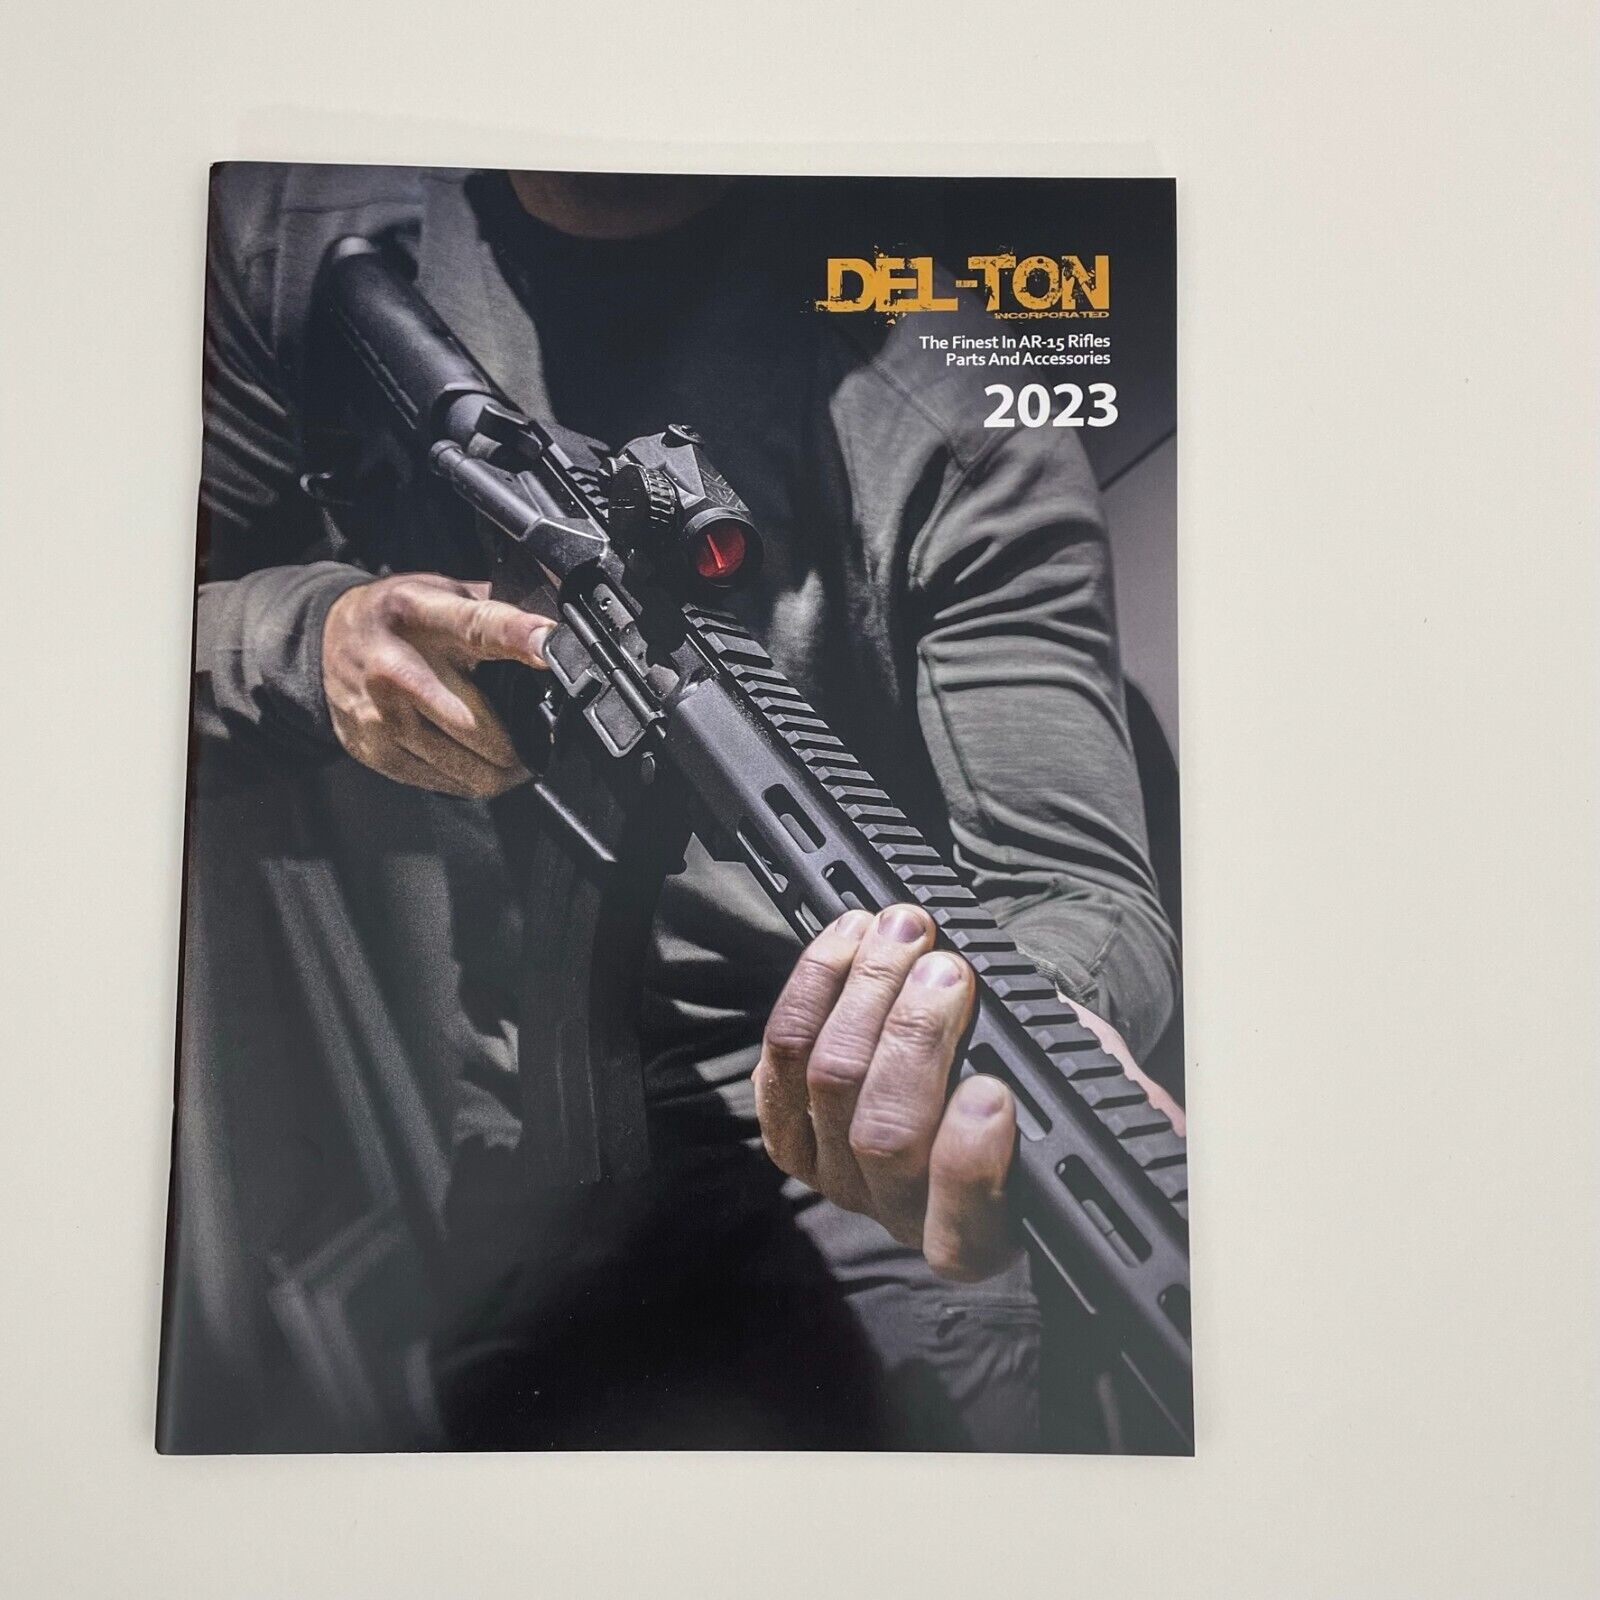 Del-Ton Delton Product Catalog From Shot Show 2023